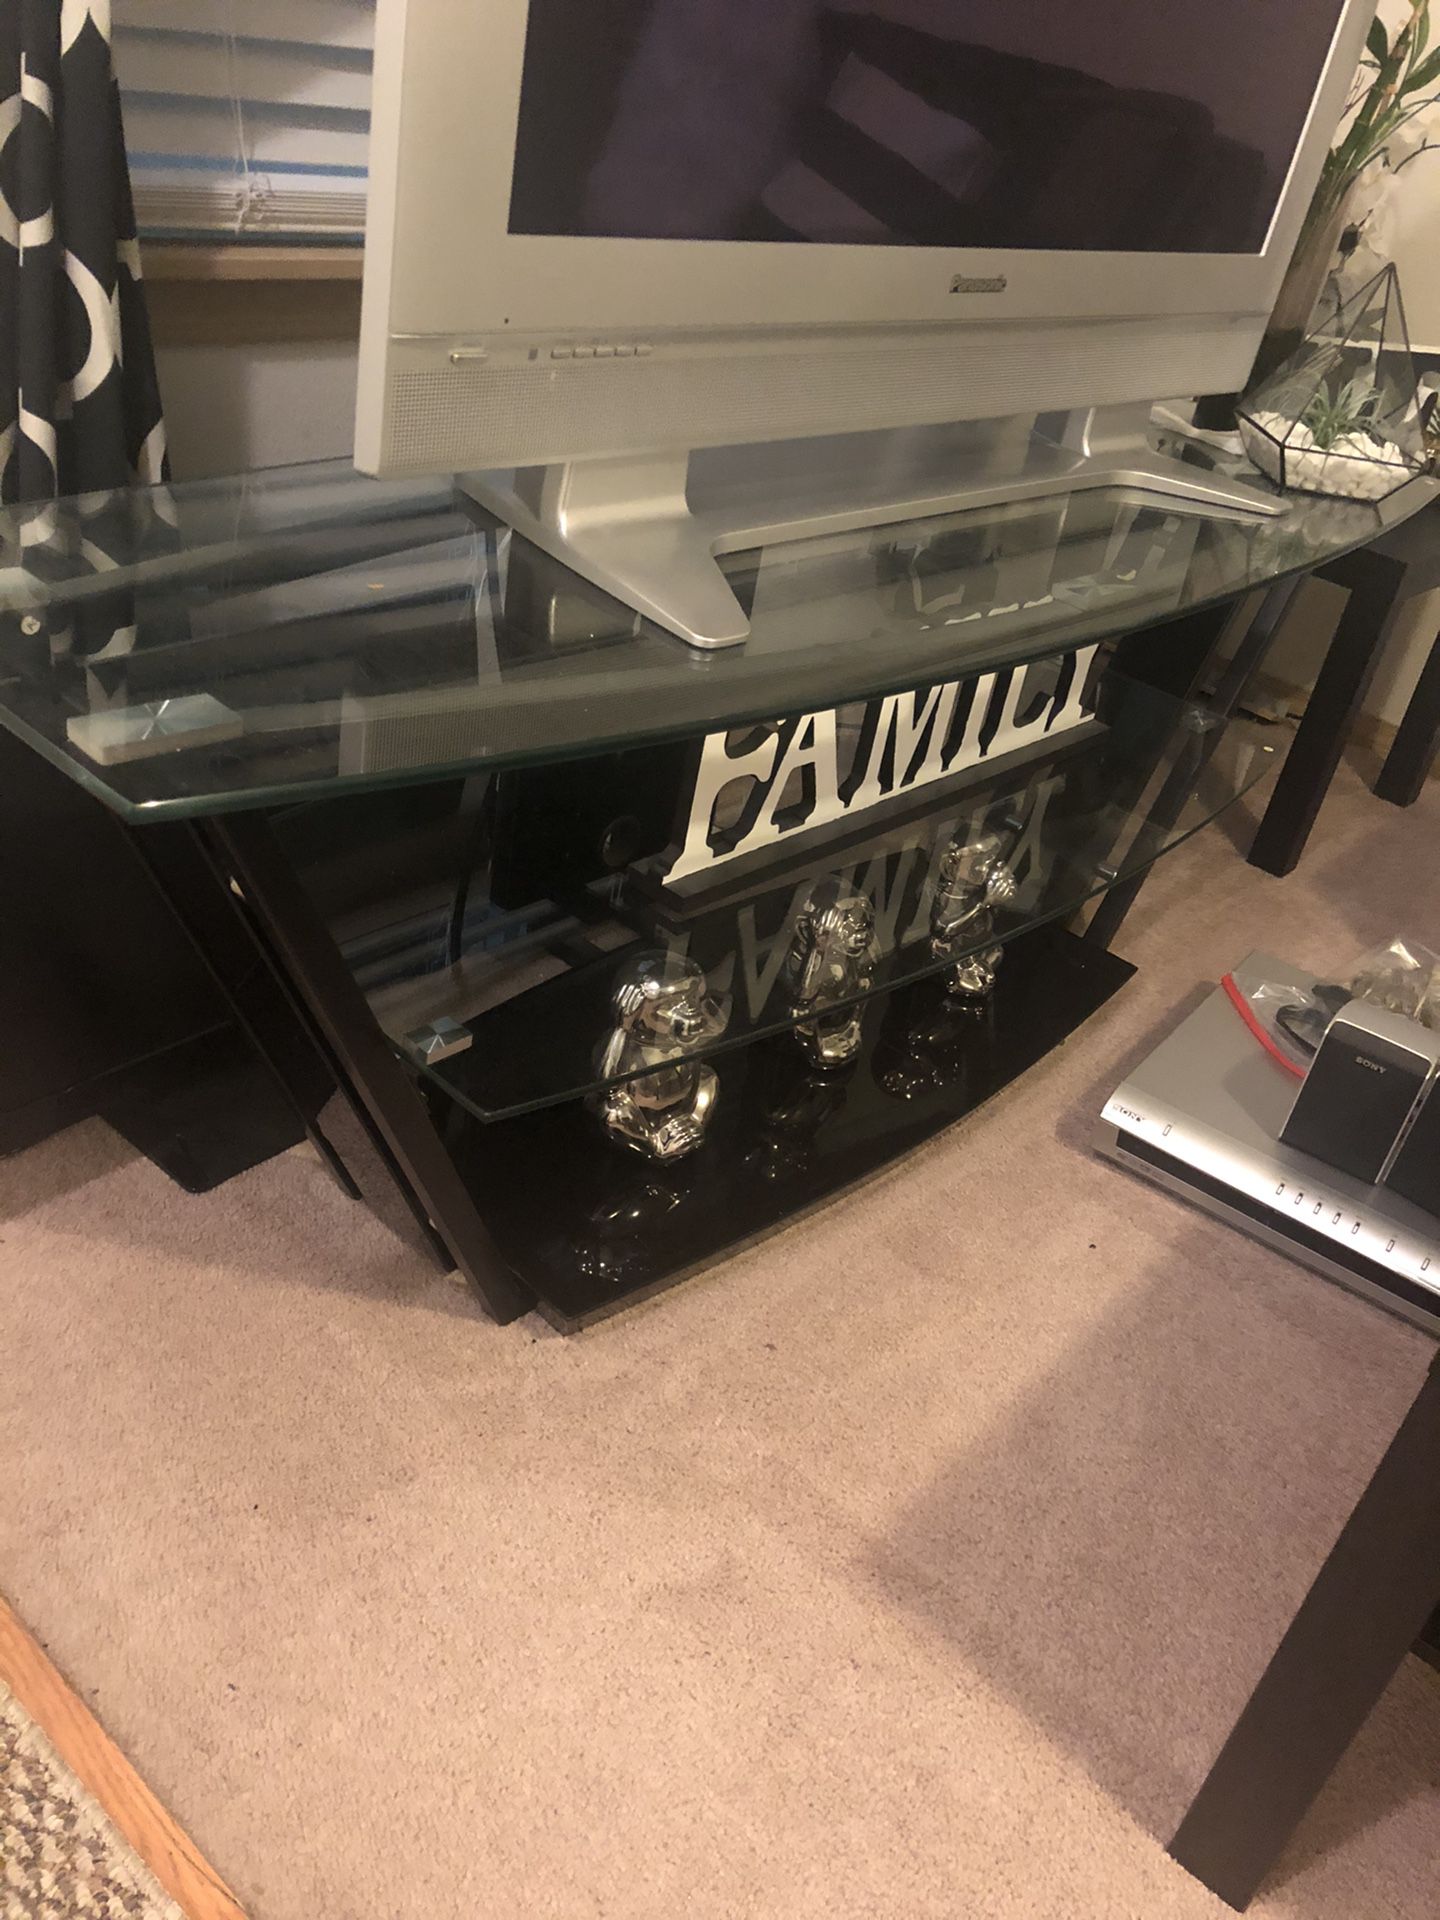 Nice glass TV stand comes with free older plasma tv